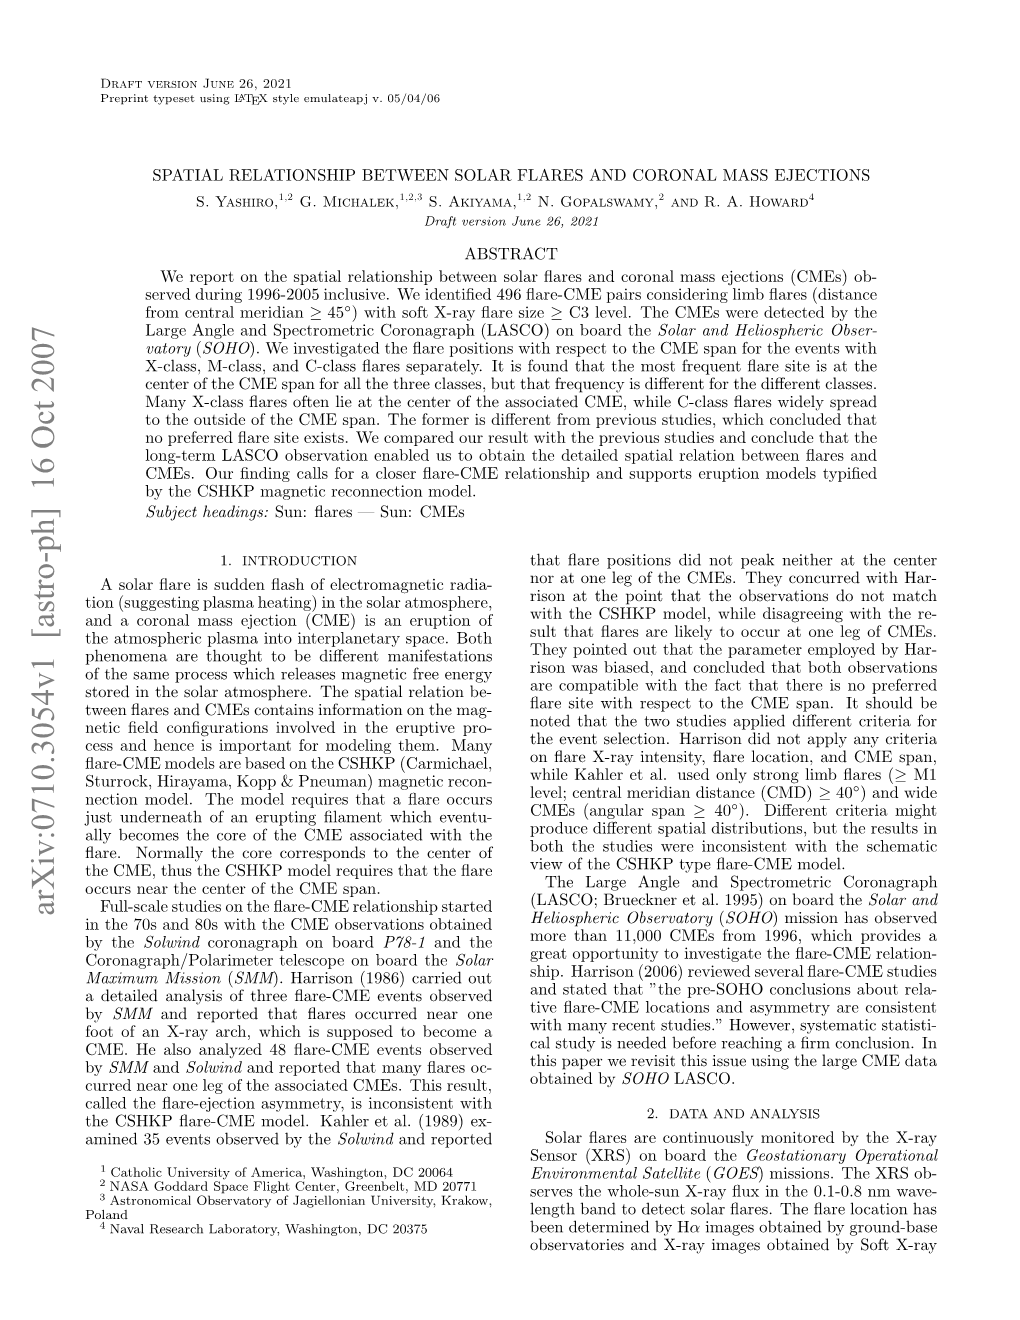 Arxiv:0710.3054V1 [Astro-Ph] 16 Oct 2007 Poland Ealdaayi Ftreﬂr-M Vnsobserved Events ﬂare-CME Three of by Analysis Detailed a H SK Aecemdl Alre L 18)Ex- (1989) the Al